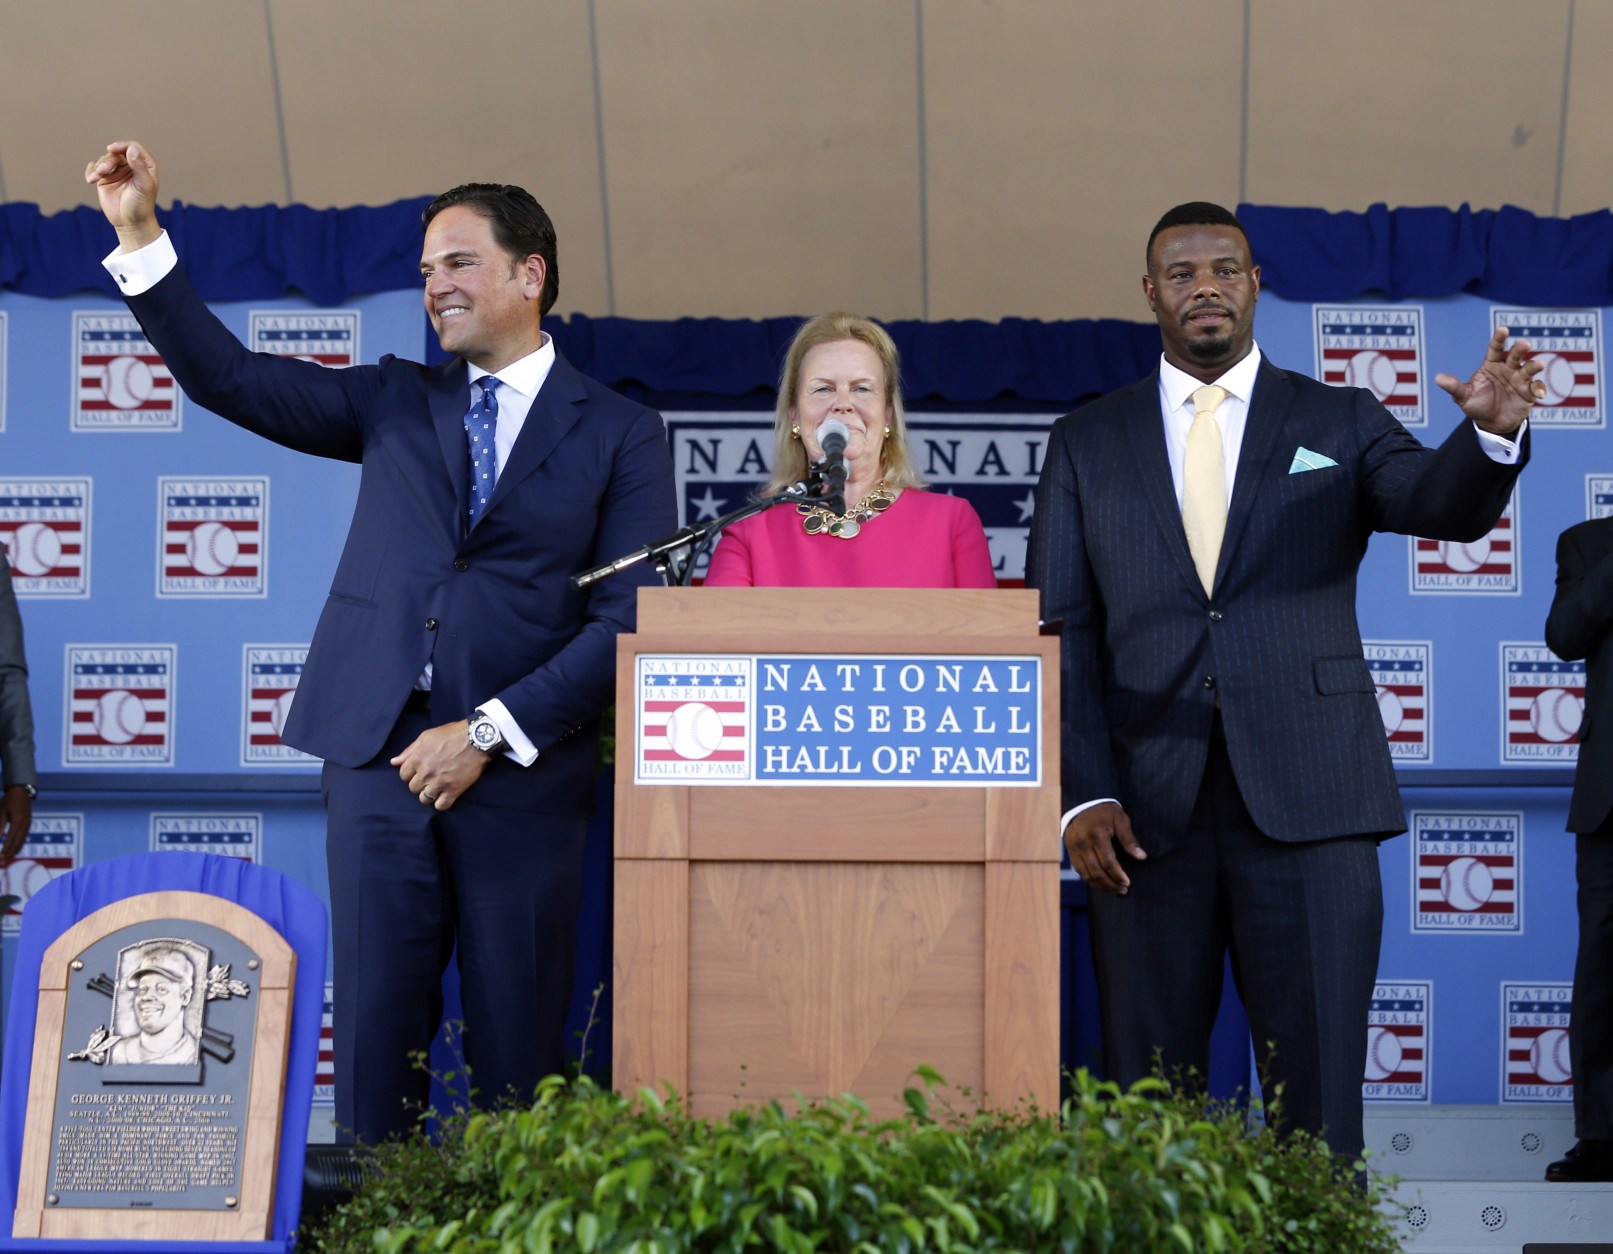 mike piazza hall of fame